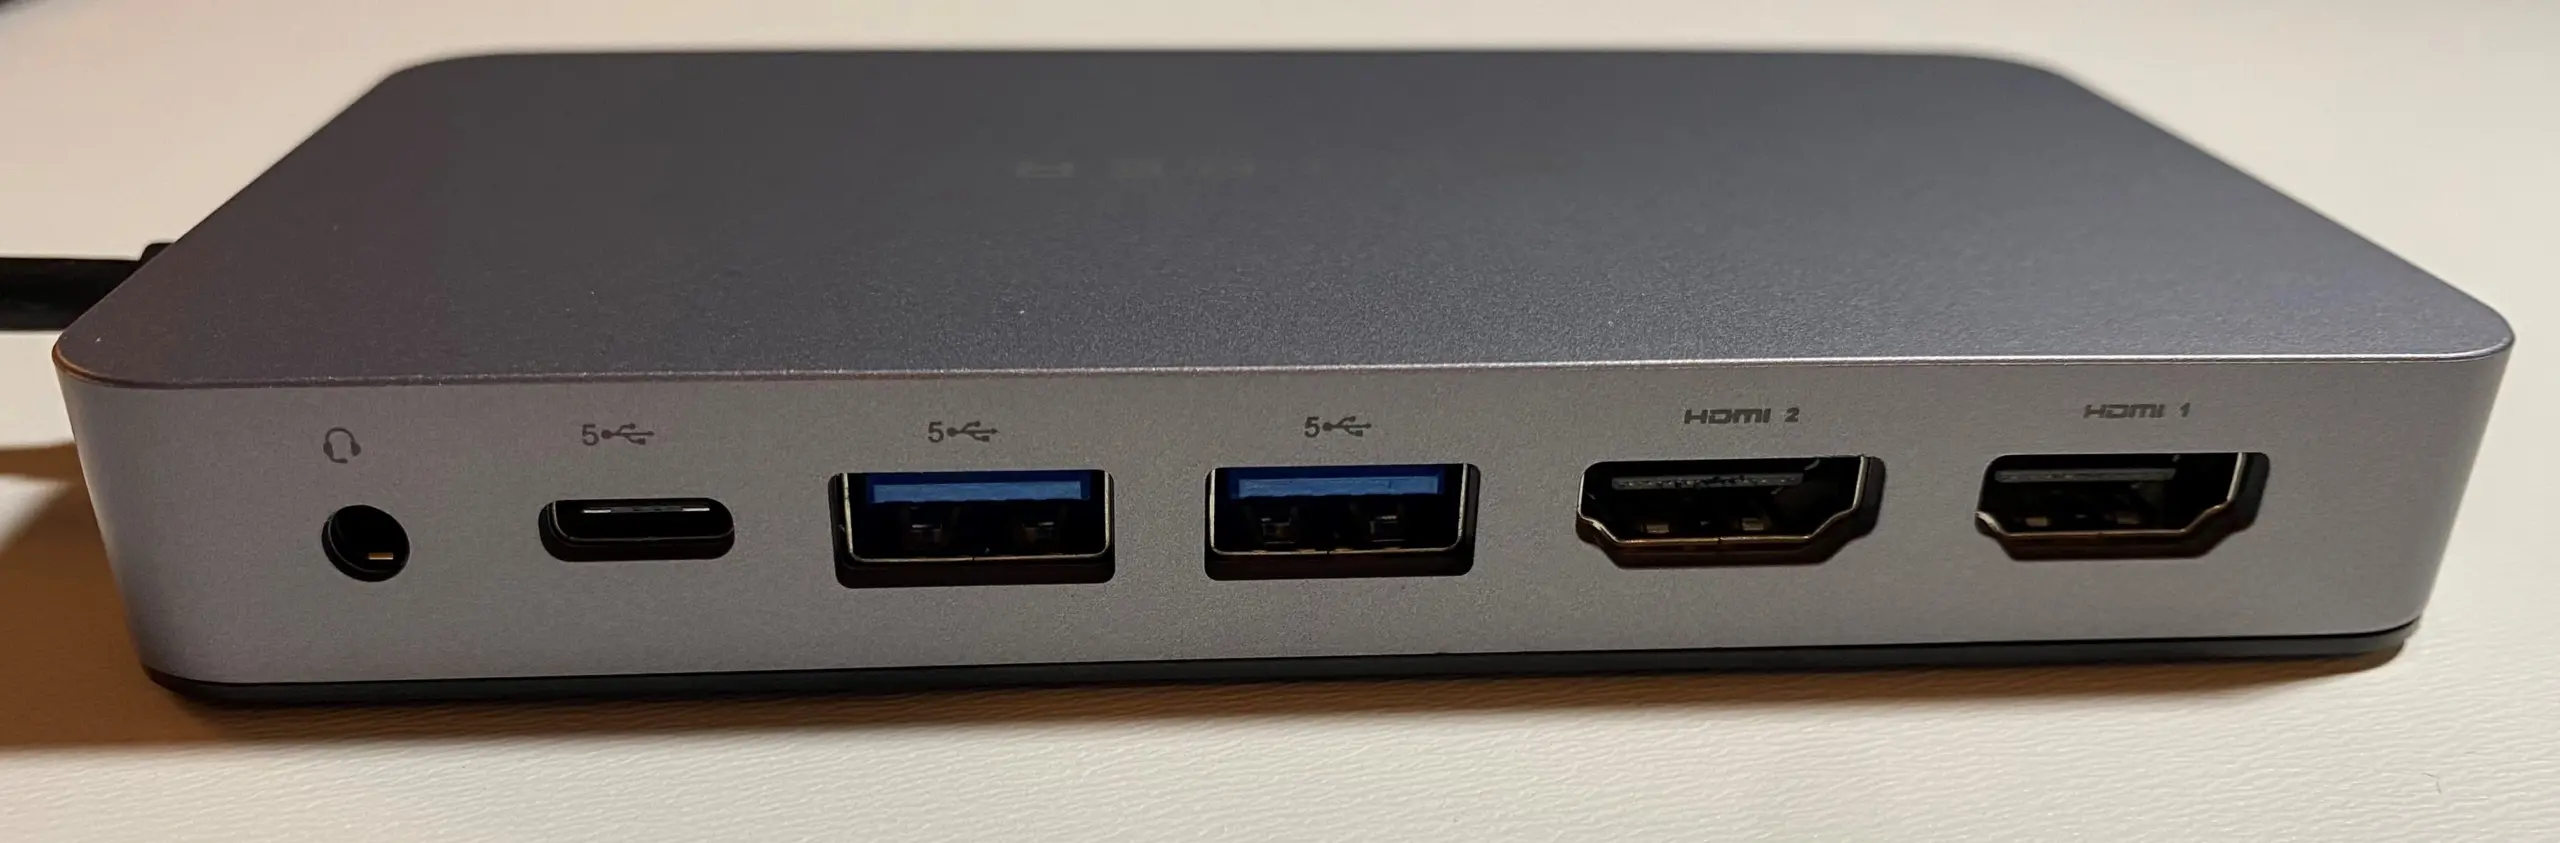 Some of the ports of the HypeDrive dock on it's side, showing dual HDMI, dual USB-C, USB-A and a 3.5mm headphone jack